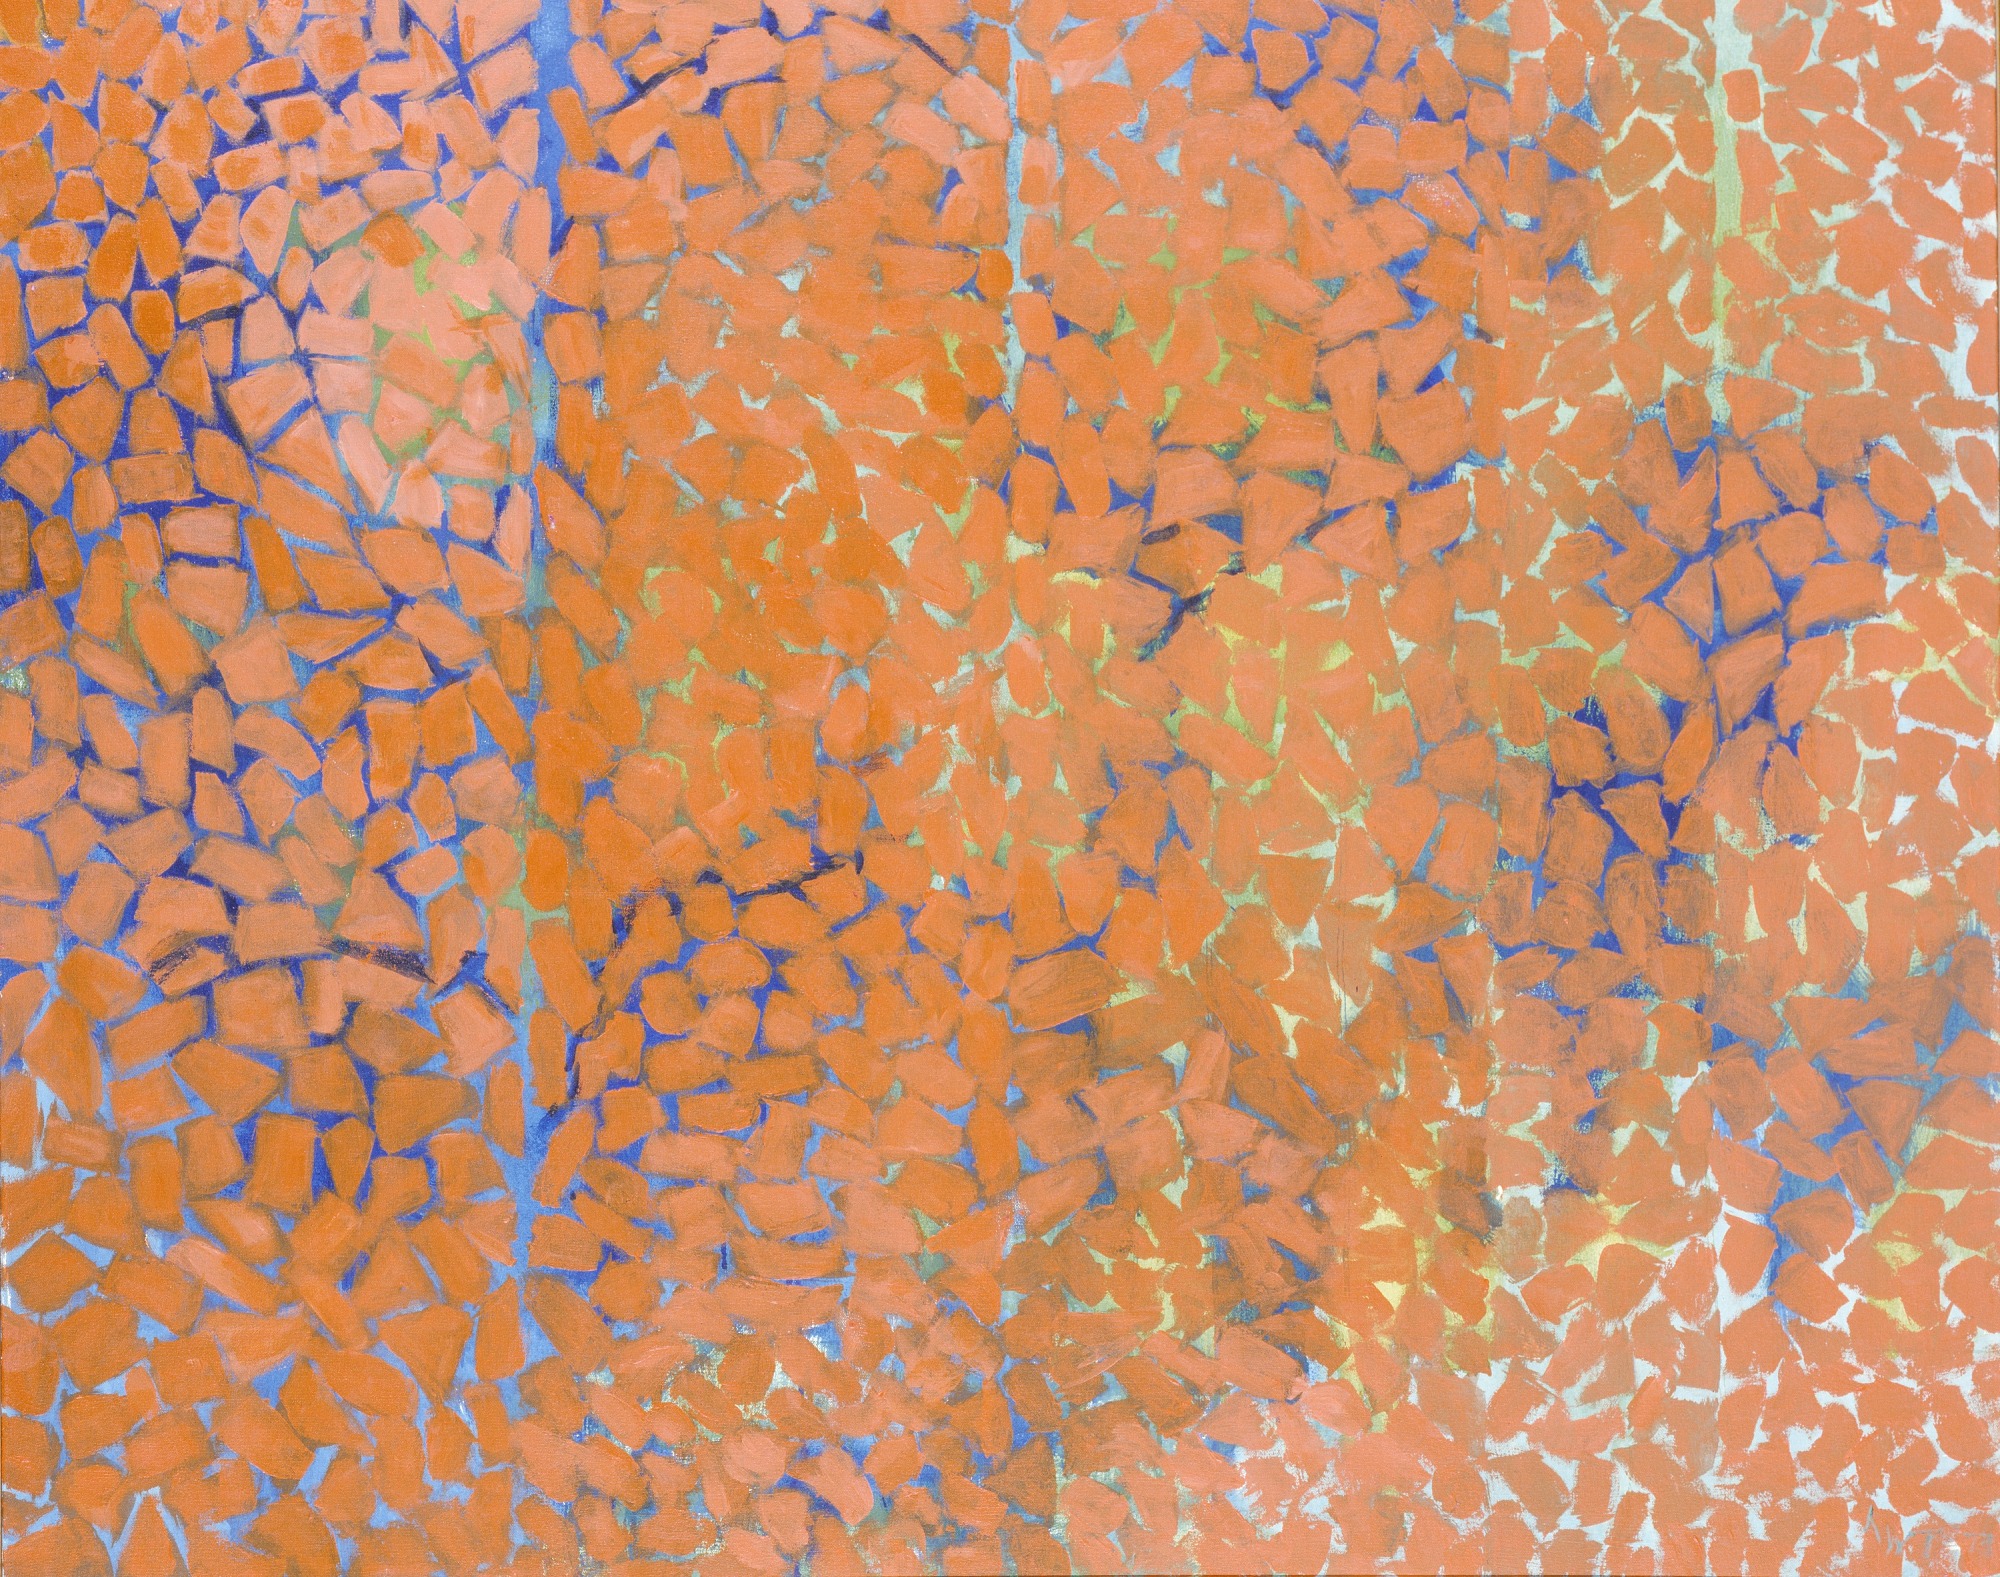 Alma Thomas, Autumn Leaves Fluttering in the Breeze, 1973, acrylic on canvas, 40 x 50 in. (101.5 x 127.0 cm), Smithsonian American Art Museum, bequest of the artist